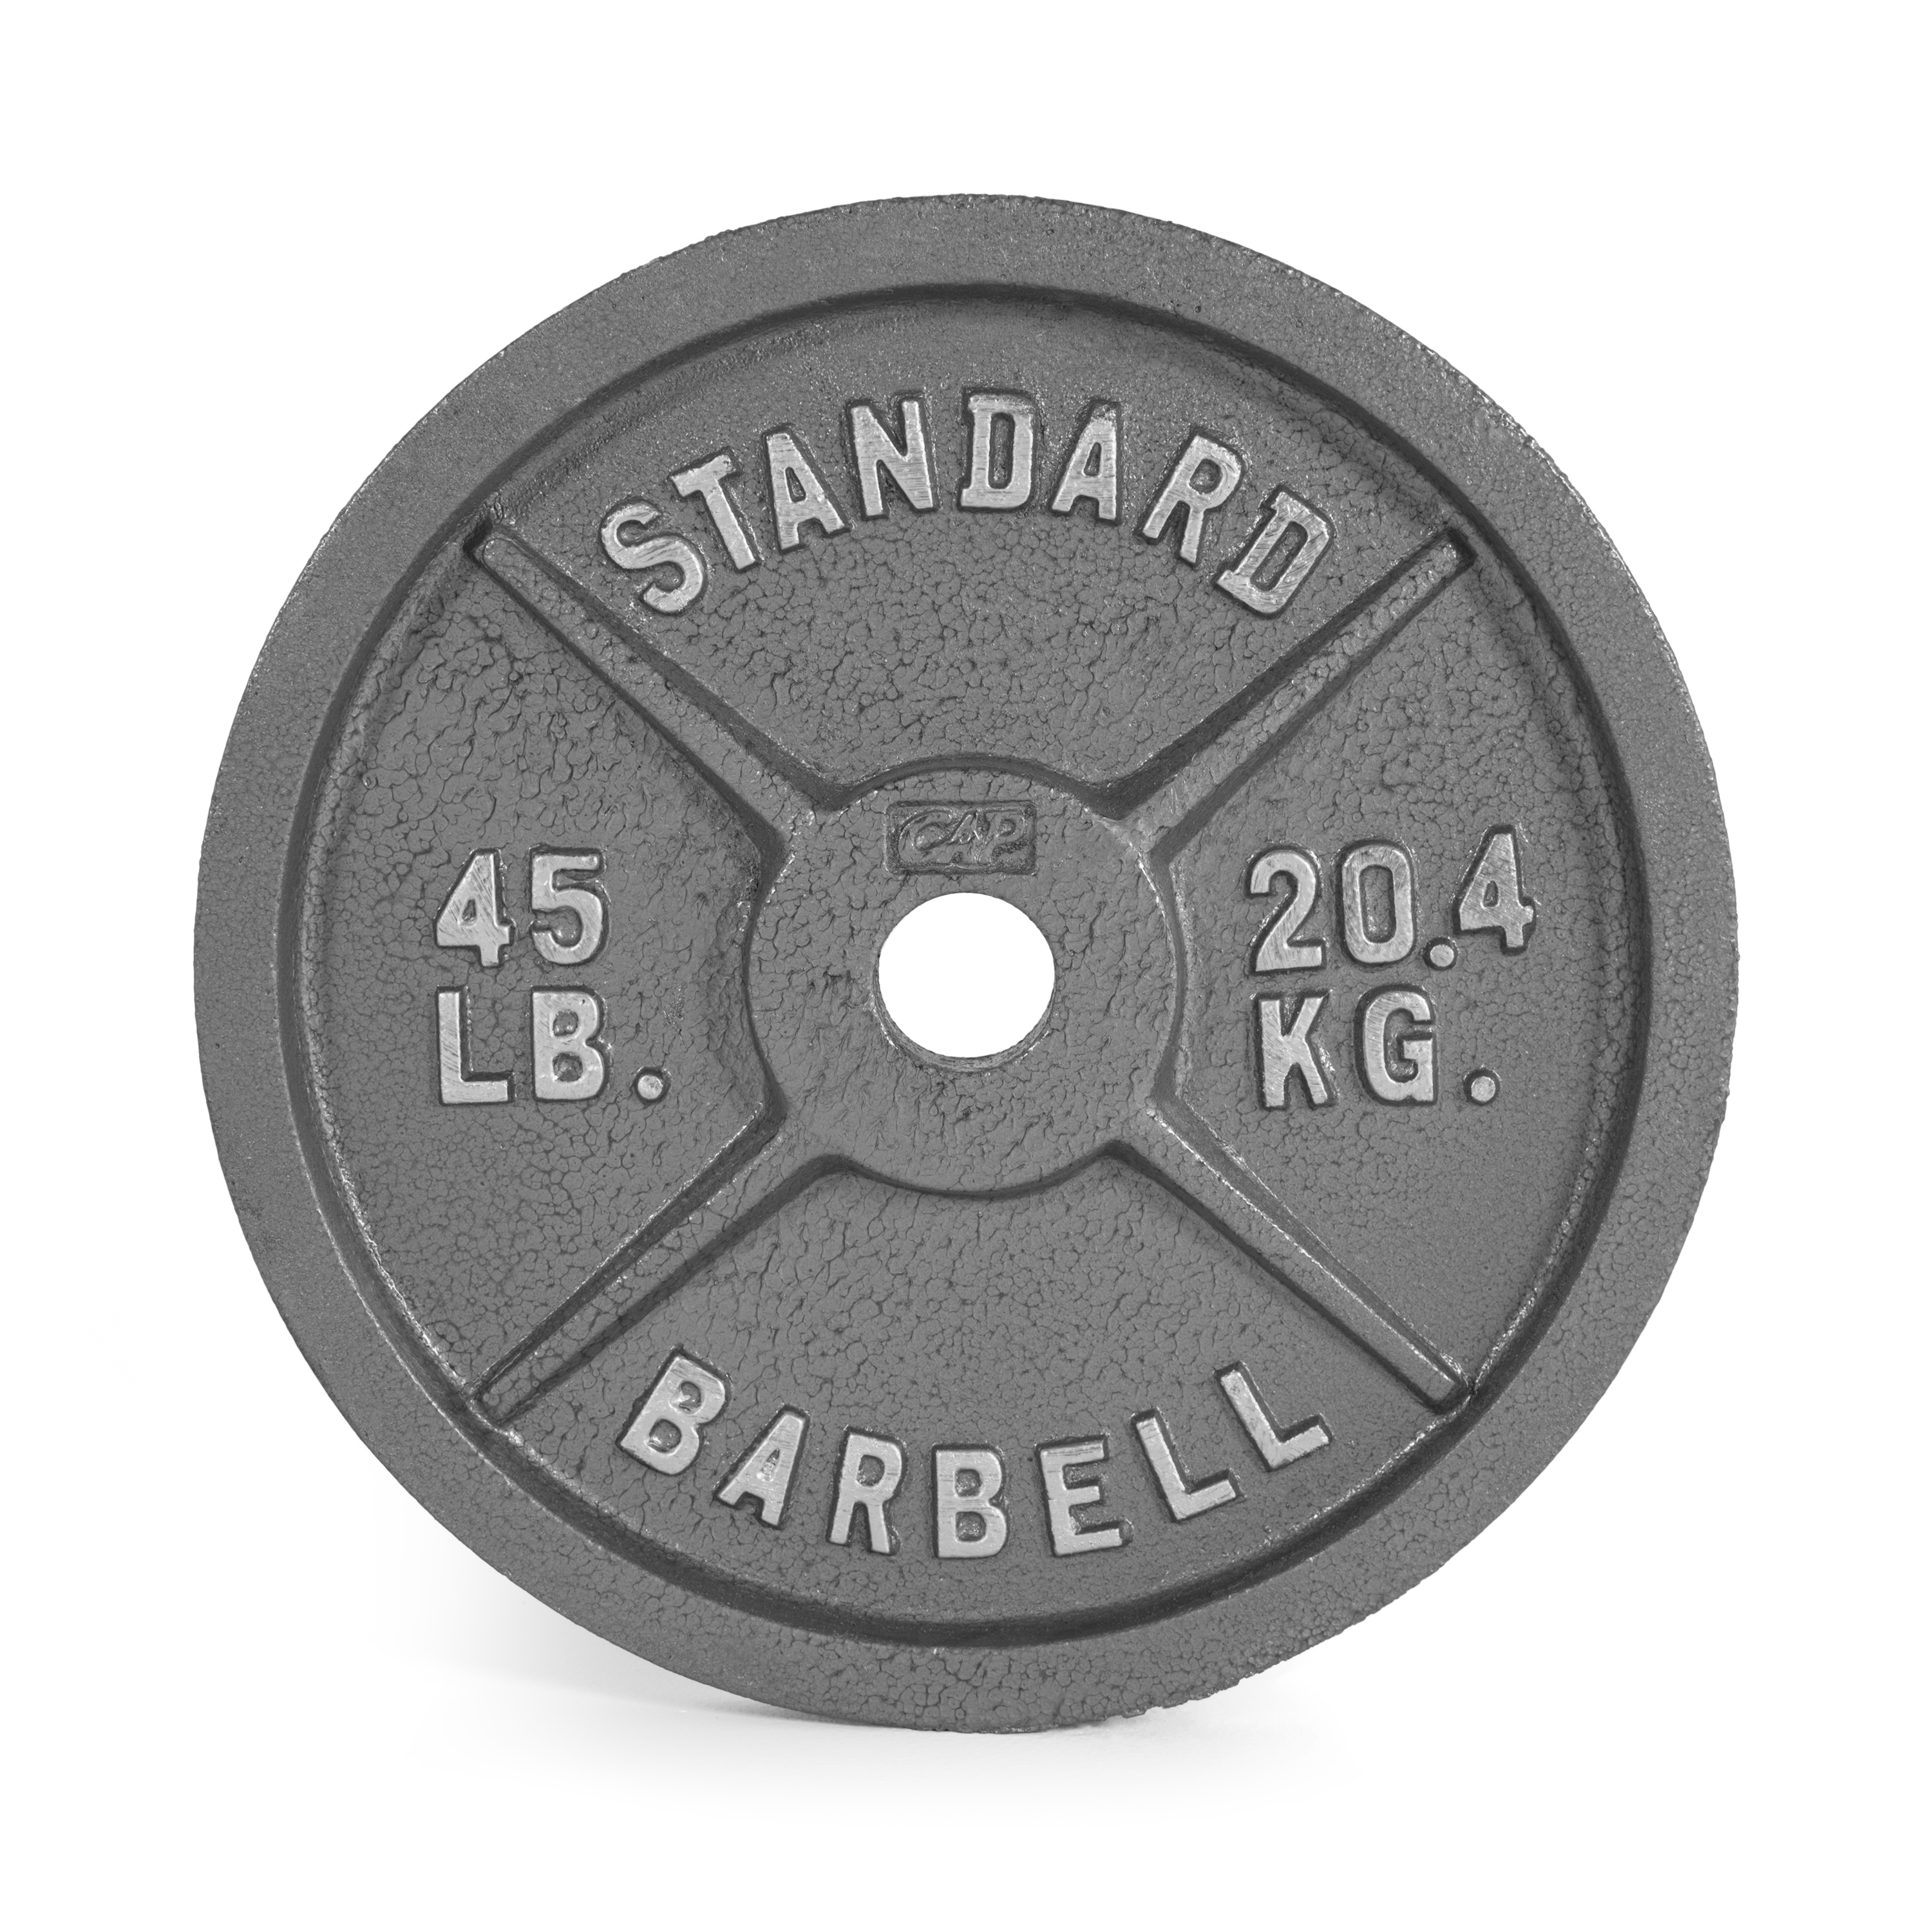 CAP Barbell Gray Olympic Cast Iron Weight Plate, 45 lb - image 1 of 2